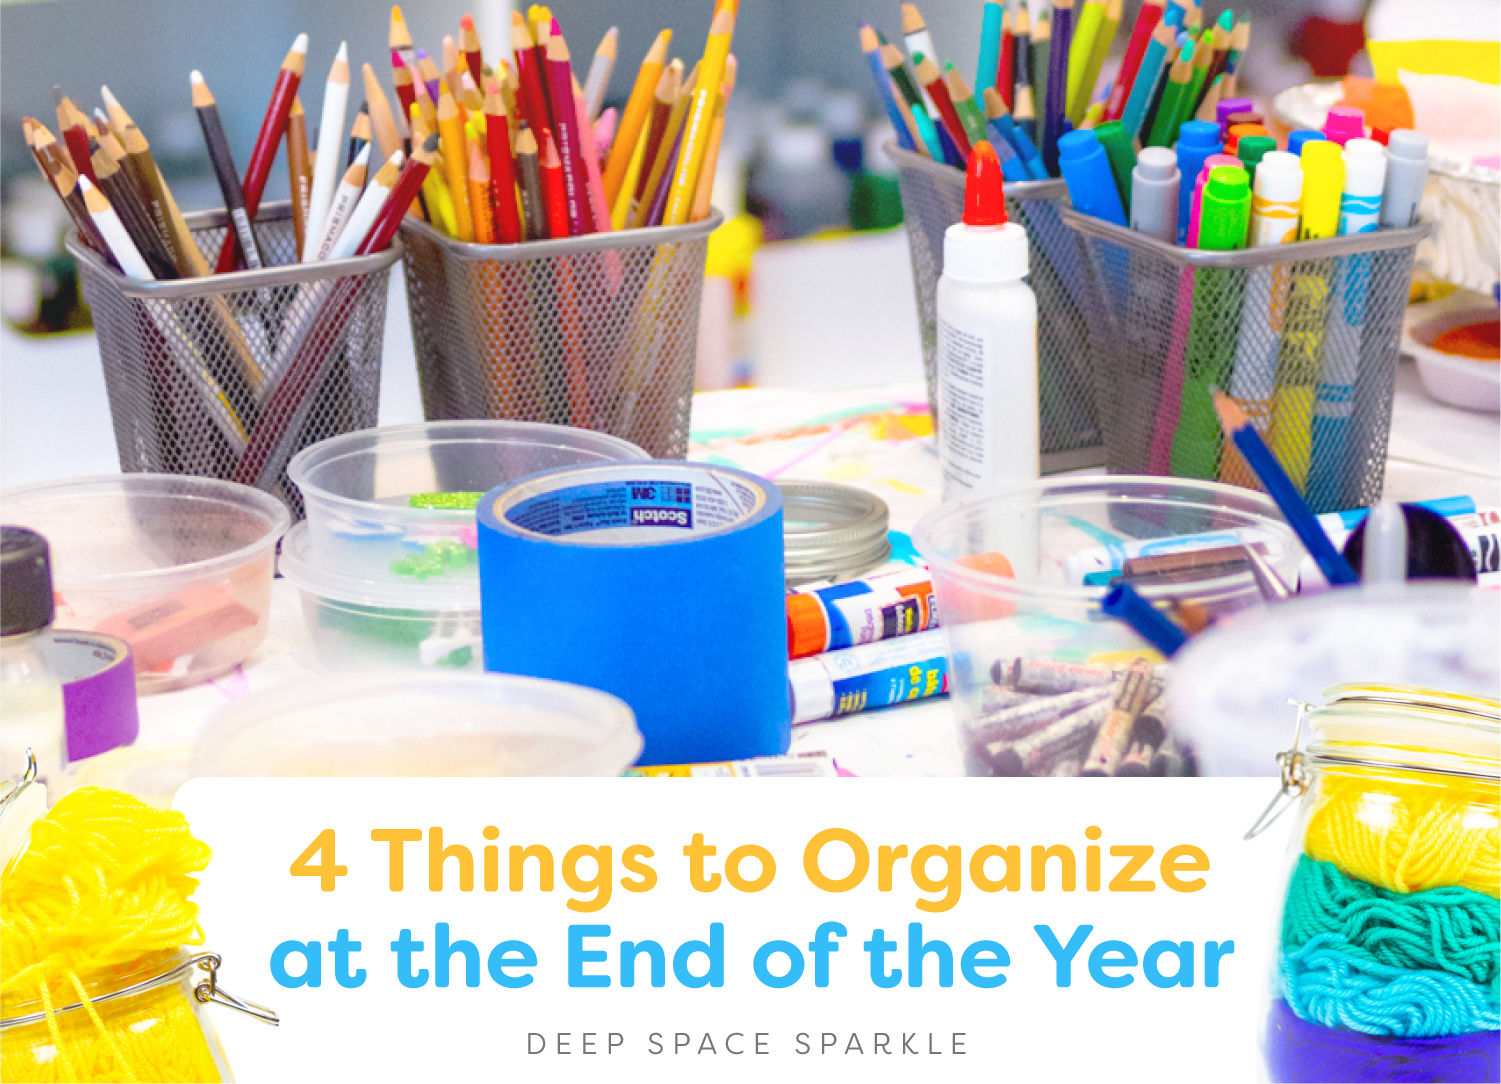 4 Things to Organize in your Art Room at the End of the Year